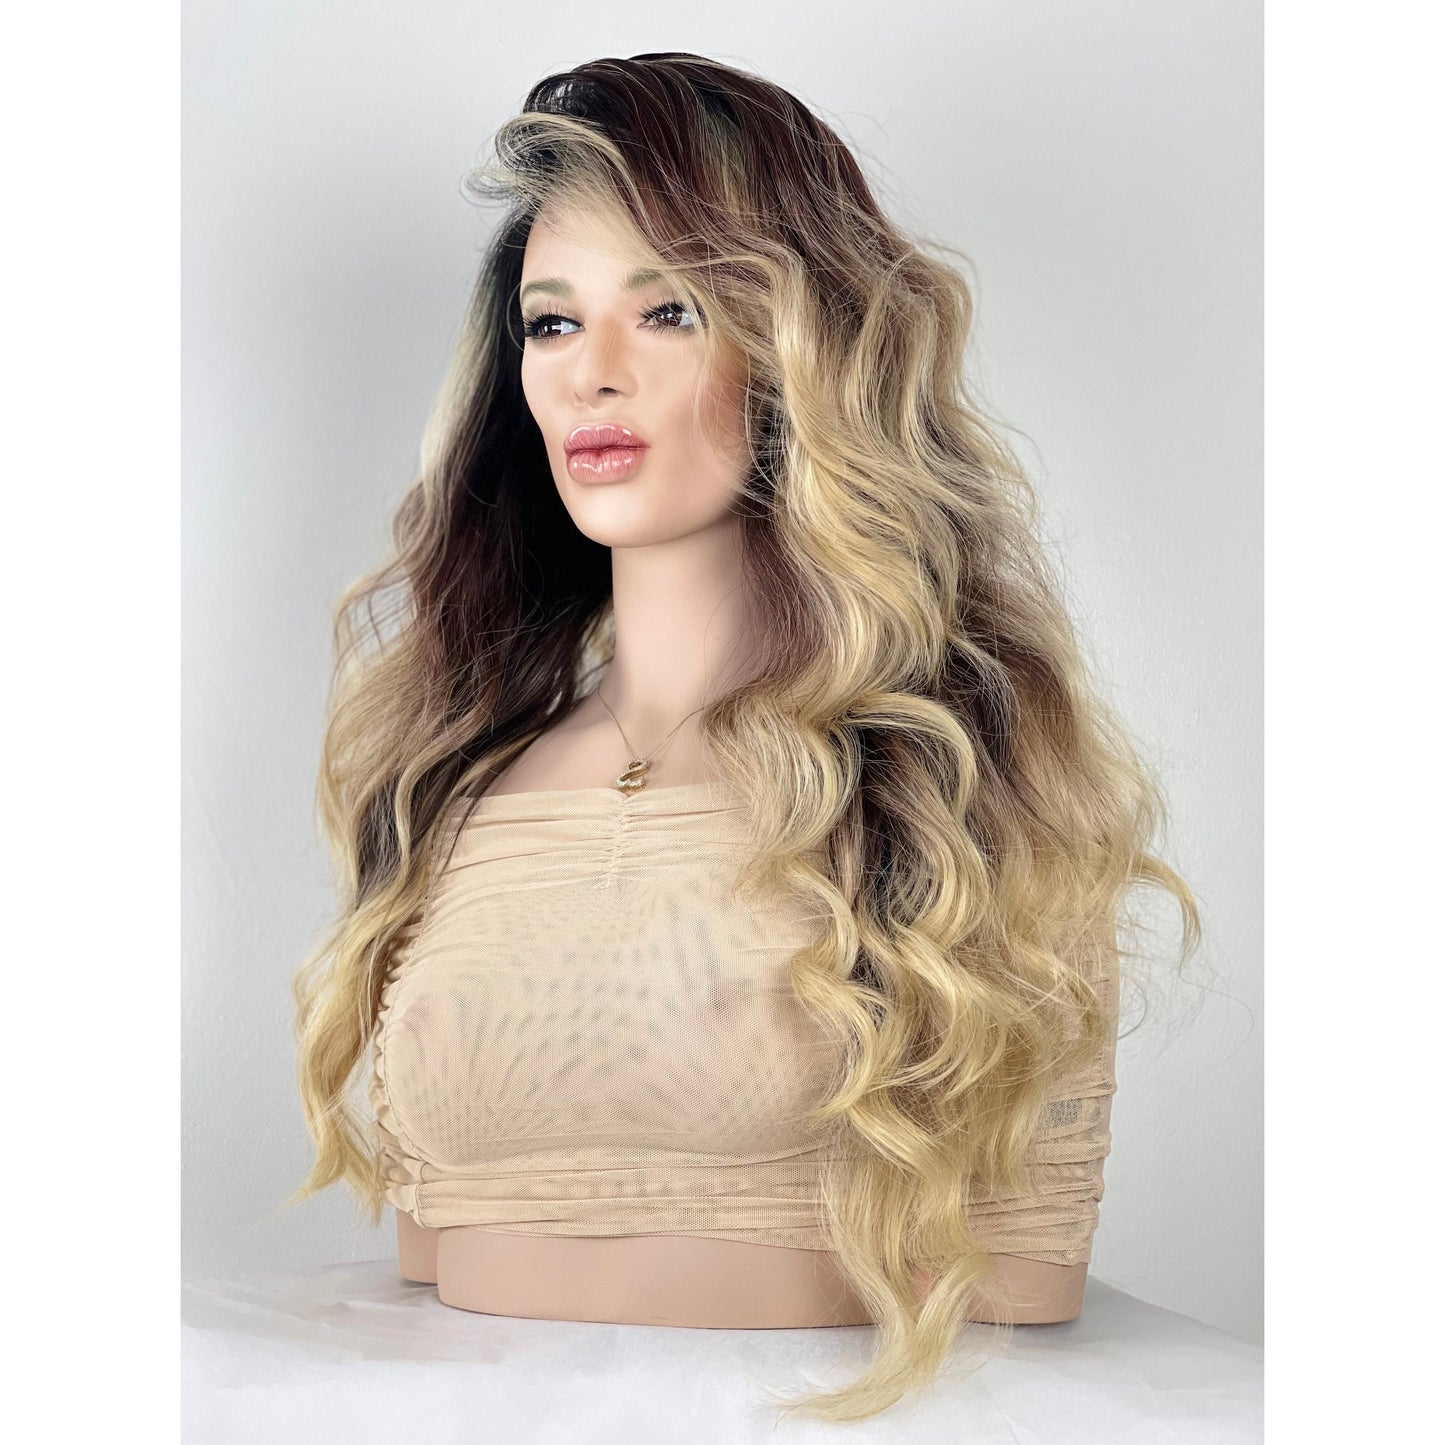 Blonde Brown Balayage Wavy Ombré Wig | Blonde Long Wig Human Hair Blend Lace Front Wig | 13x6” Free Parting Multi-Directional Layered Wig